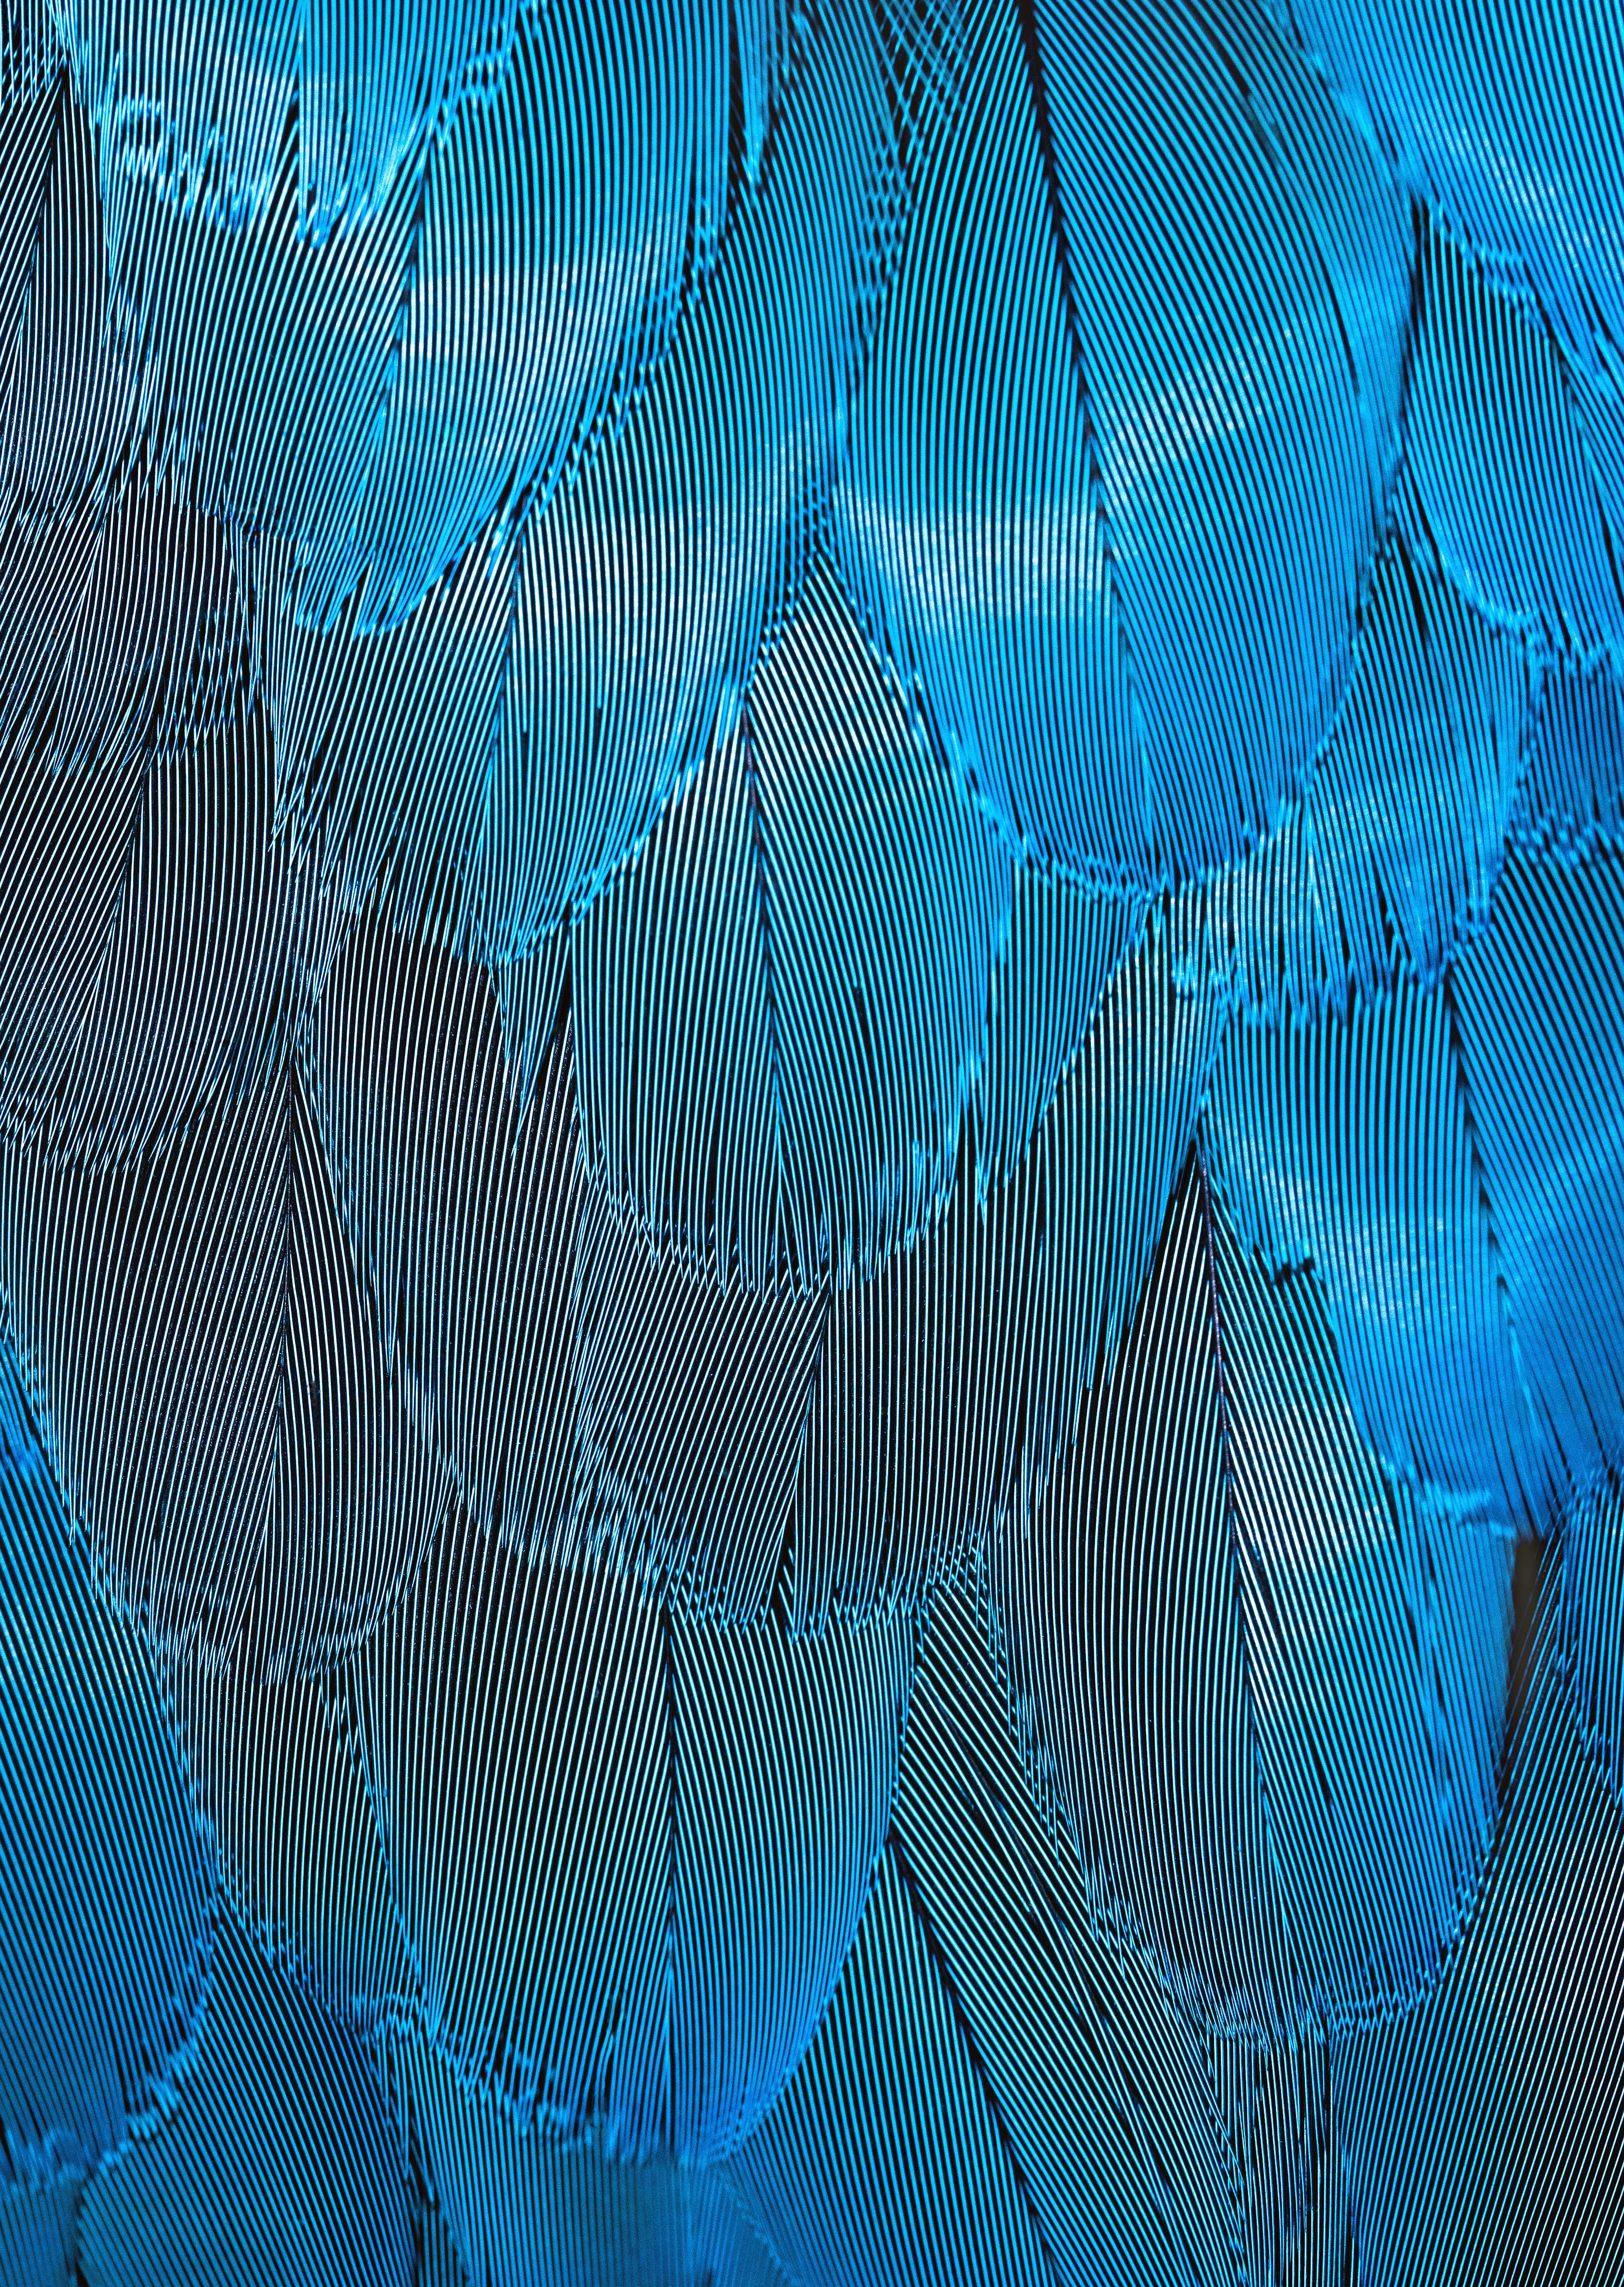 macro, textures, feather, blue, texture, iridescent wallpaper for mobile